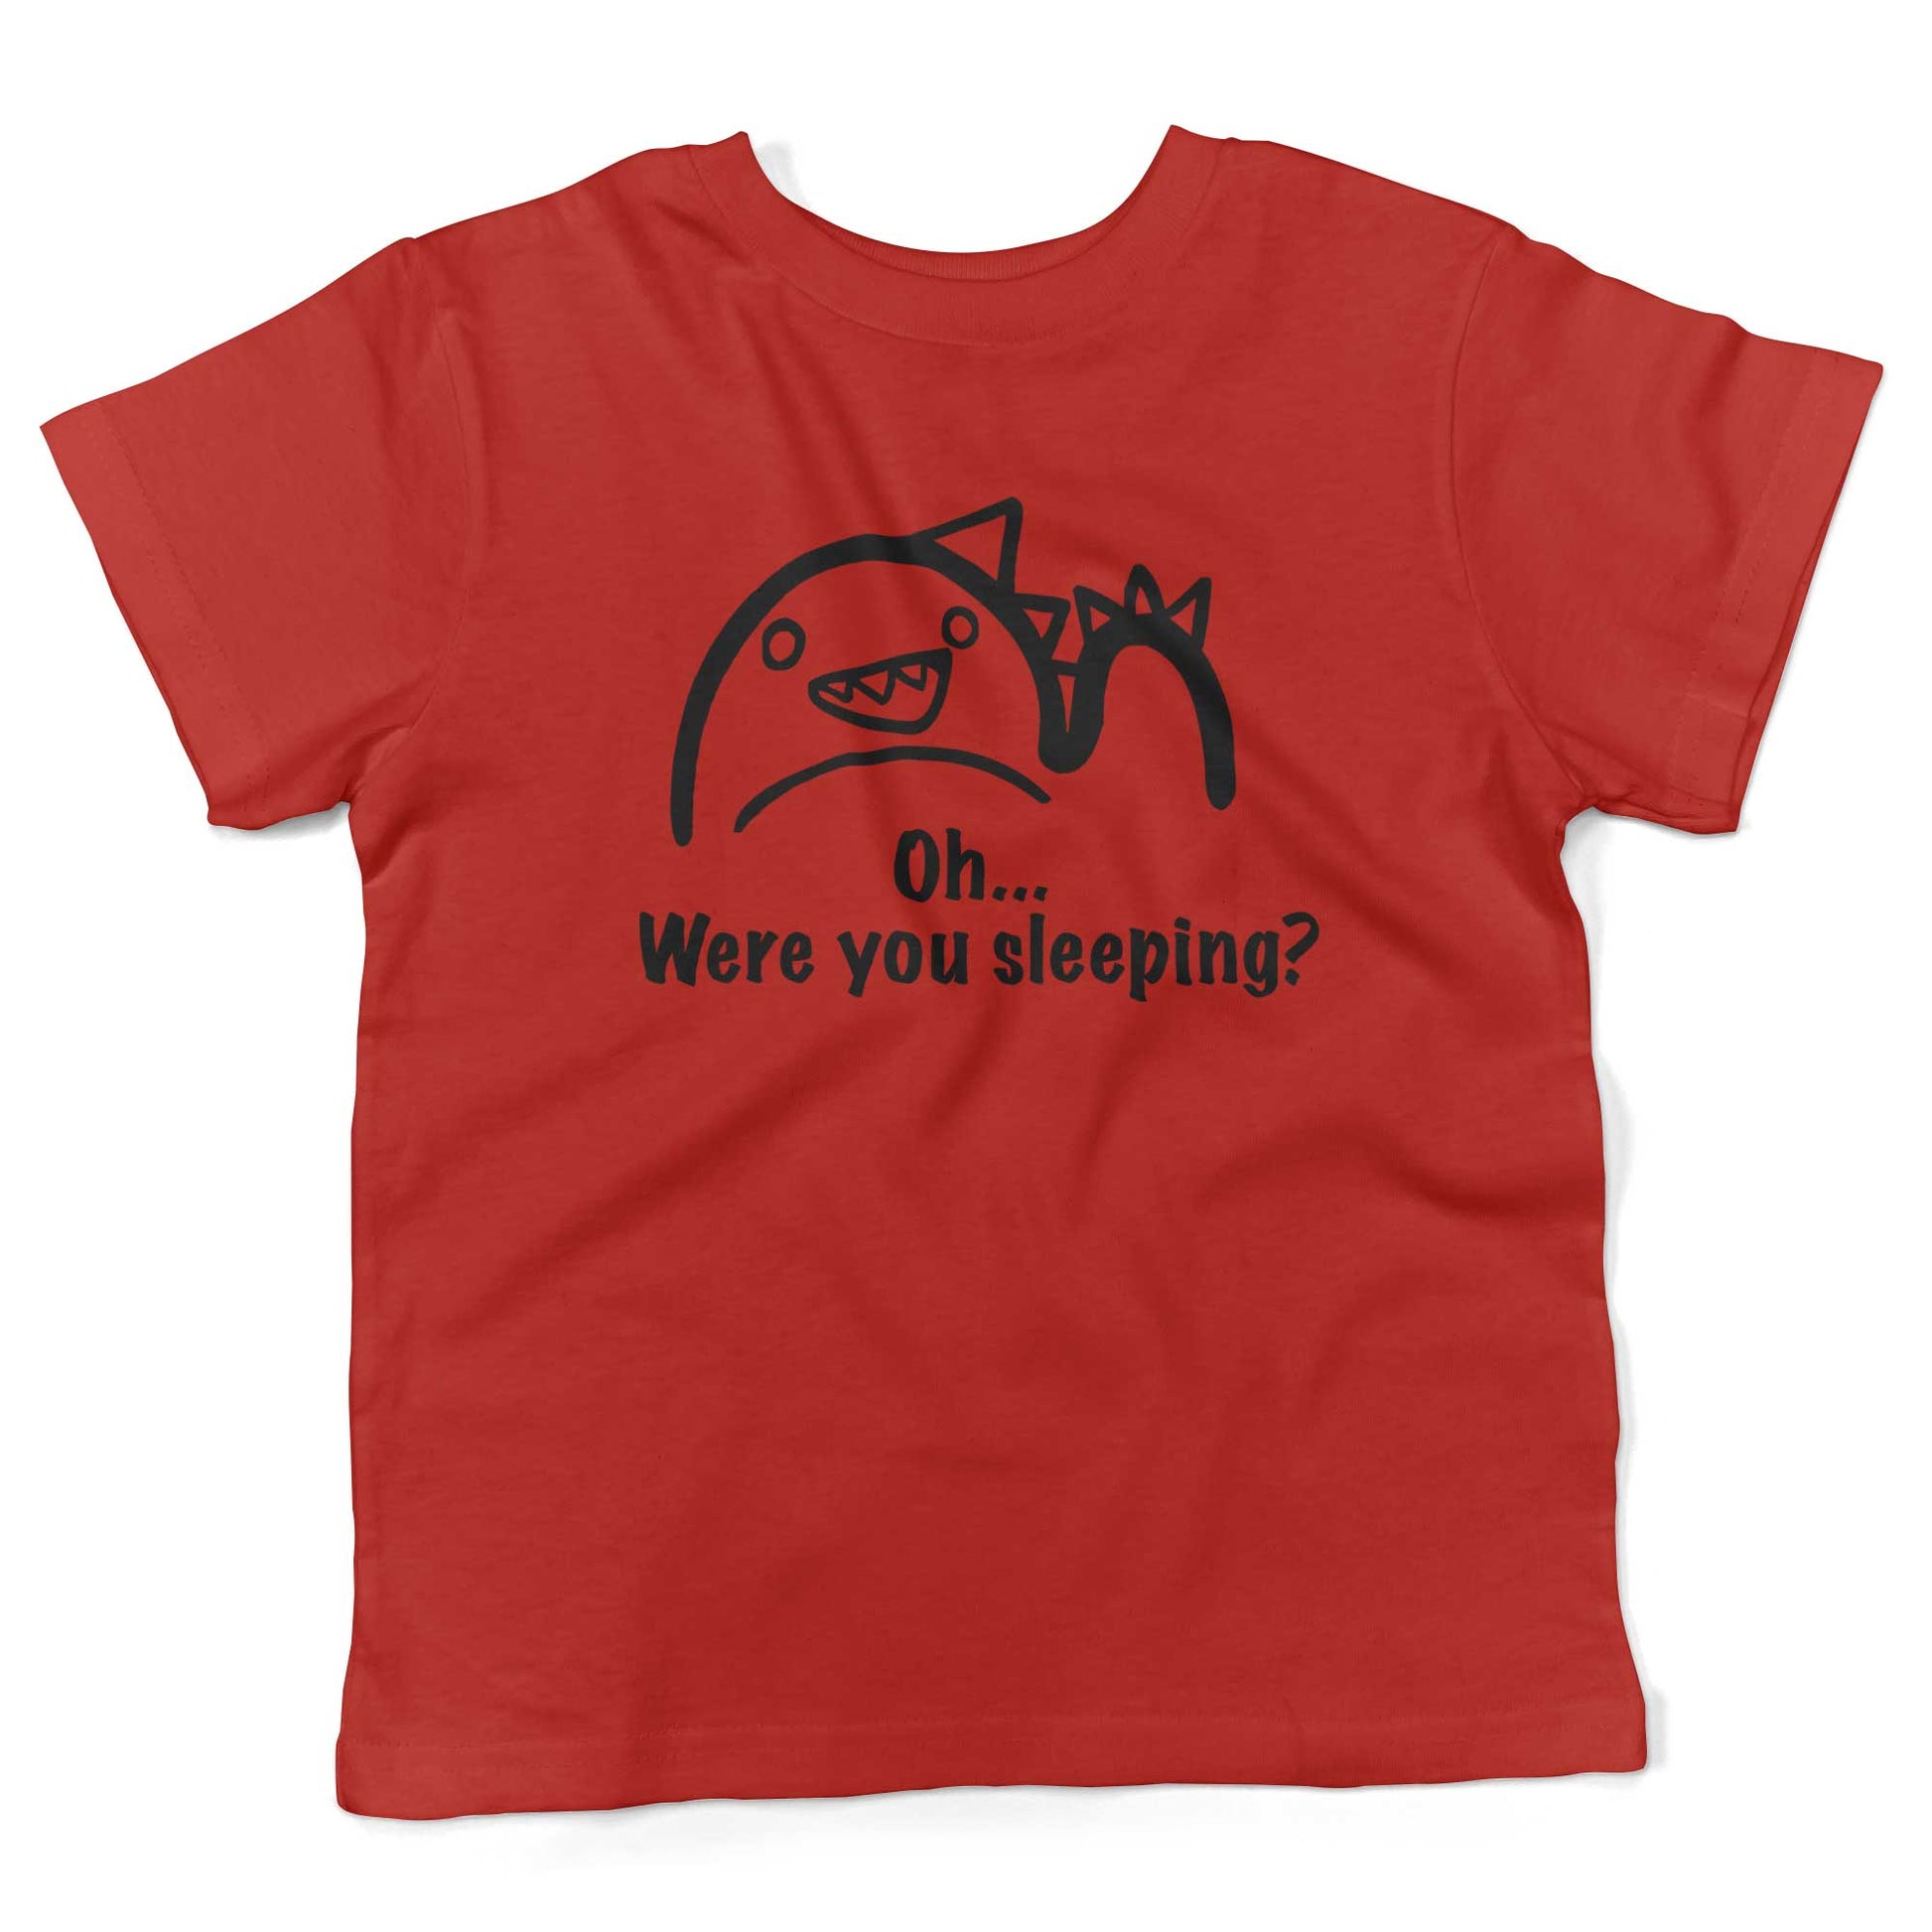 Oh...Were you sleeping? Toddler Shirt-Red-2T